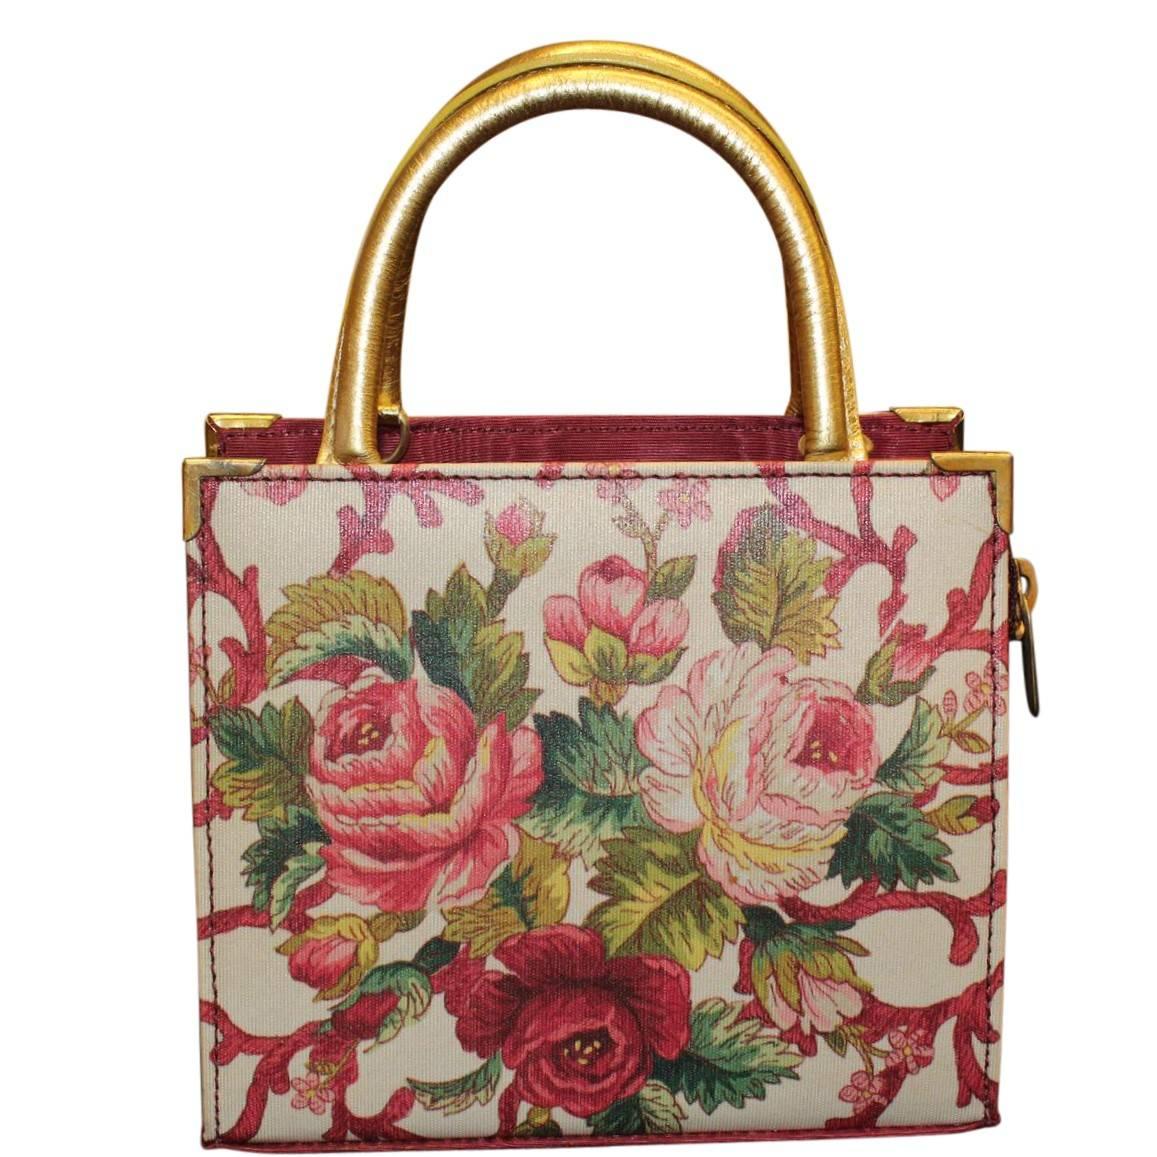 Masterpiece by Carlo Zini MIlano
One of the world's greatest bijoux designers
Floral printed textile
Wonderful golden metal, crystals and swarovsky applications
Resins flowers
Golden leather handles
Internal zip pocket
Can be carried